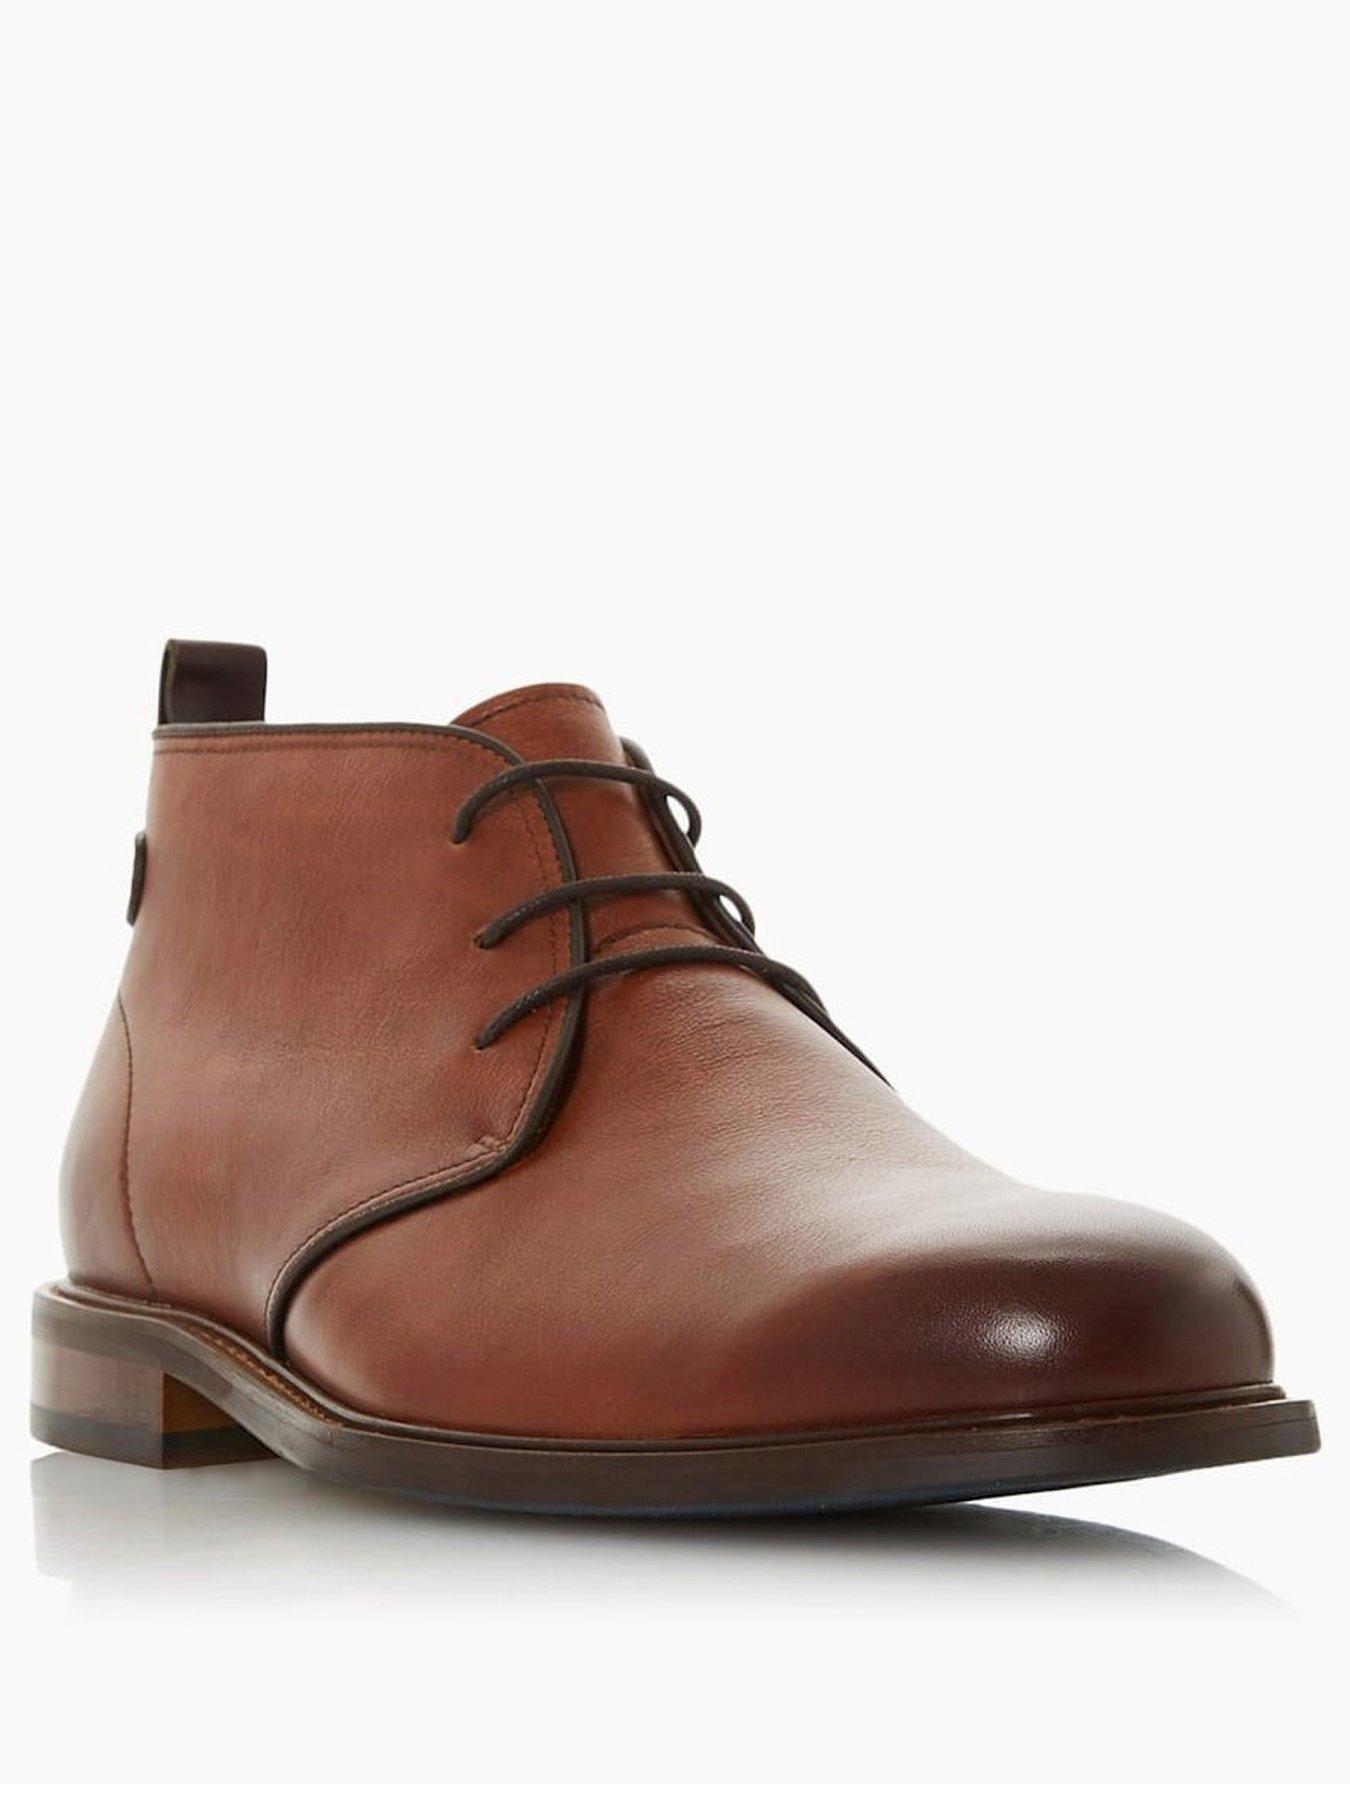 Giles Jones Mens Oxford Shoes Chukka Heel Lace Up Breathable Wing Tip Brogue Dress Shoe